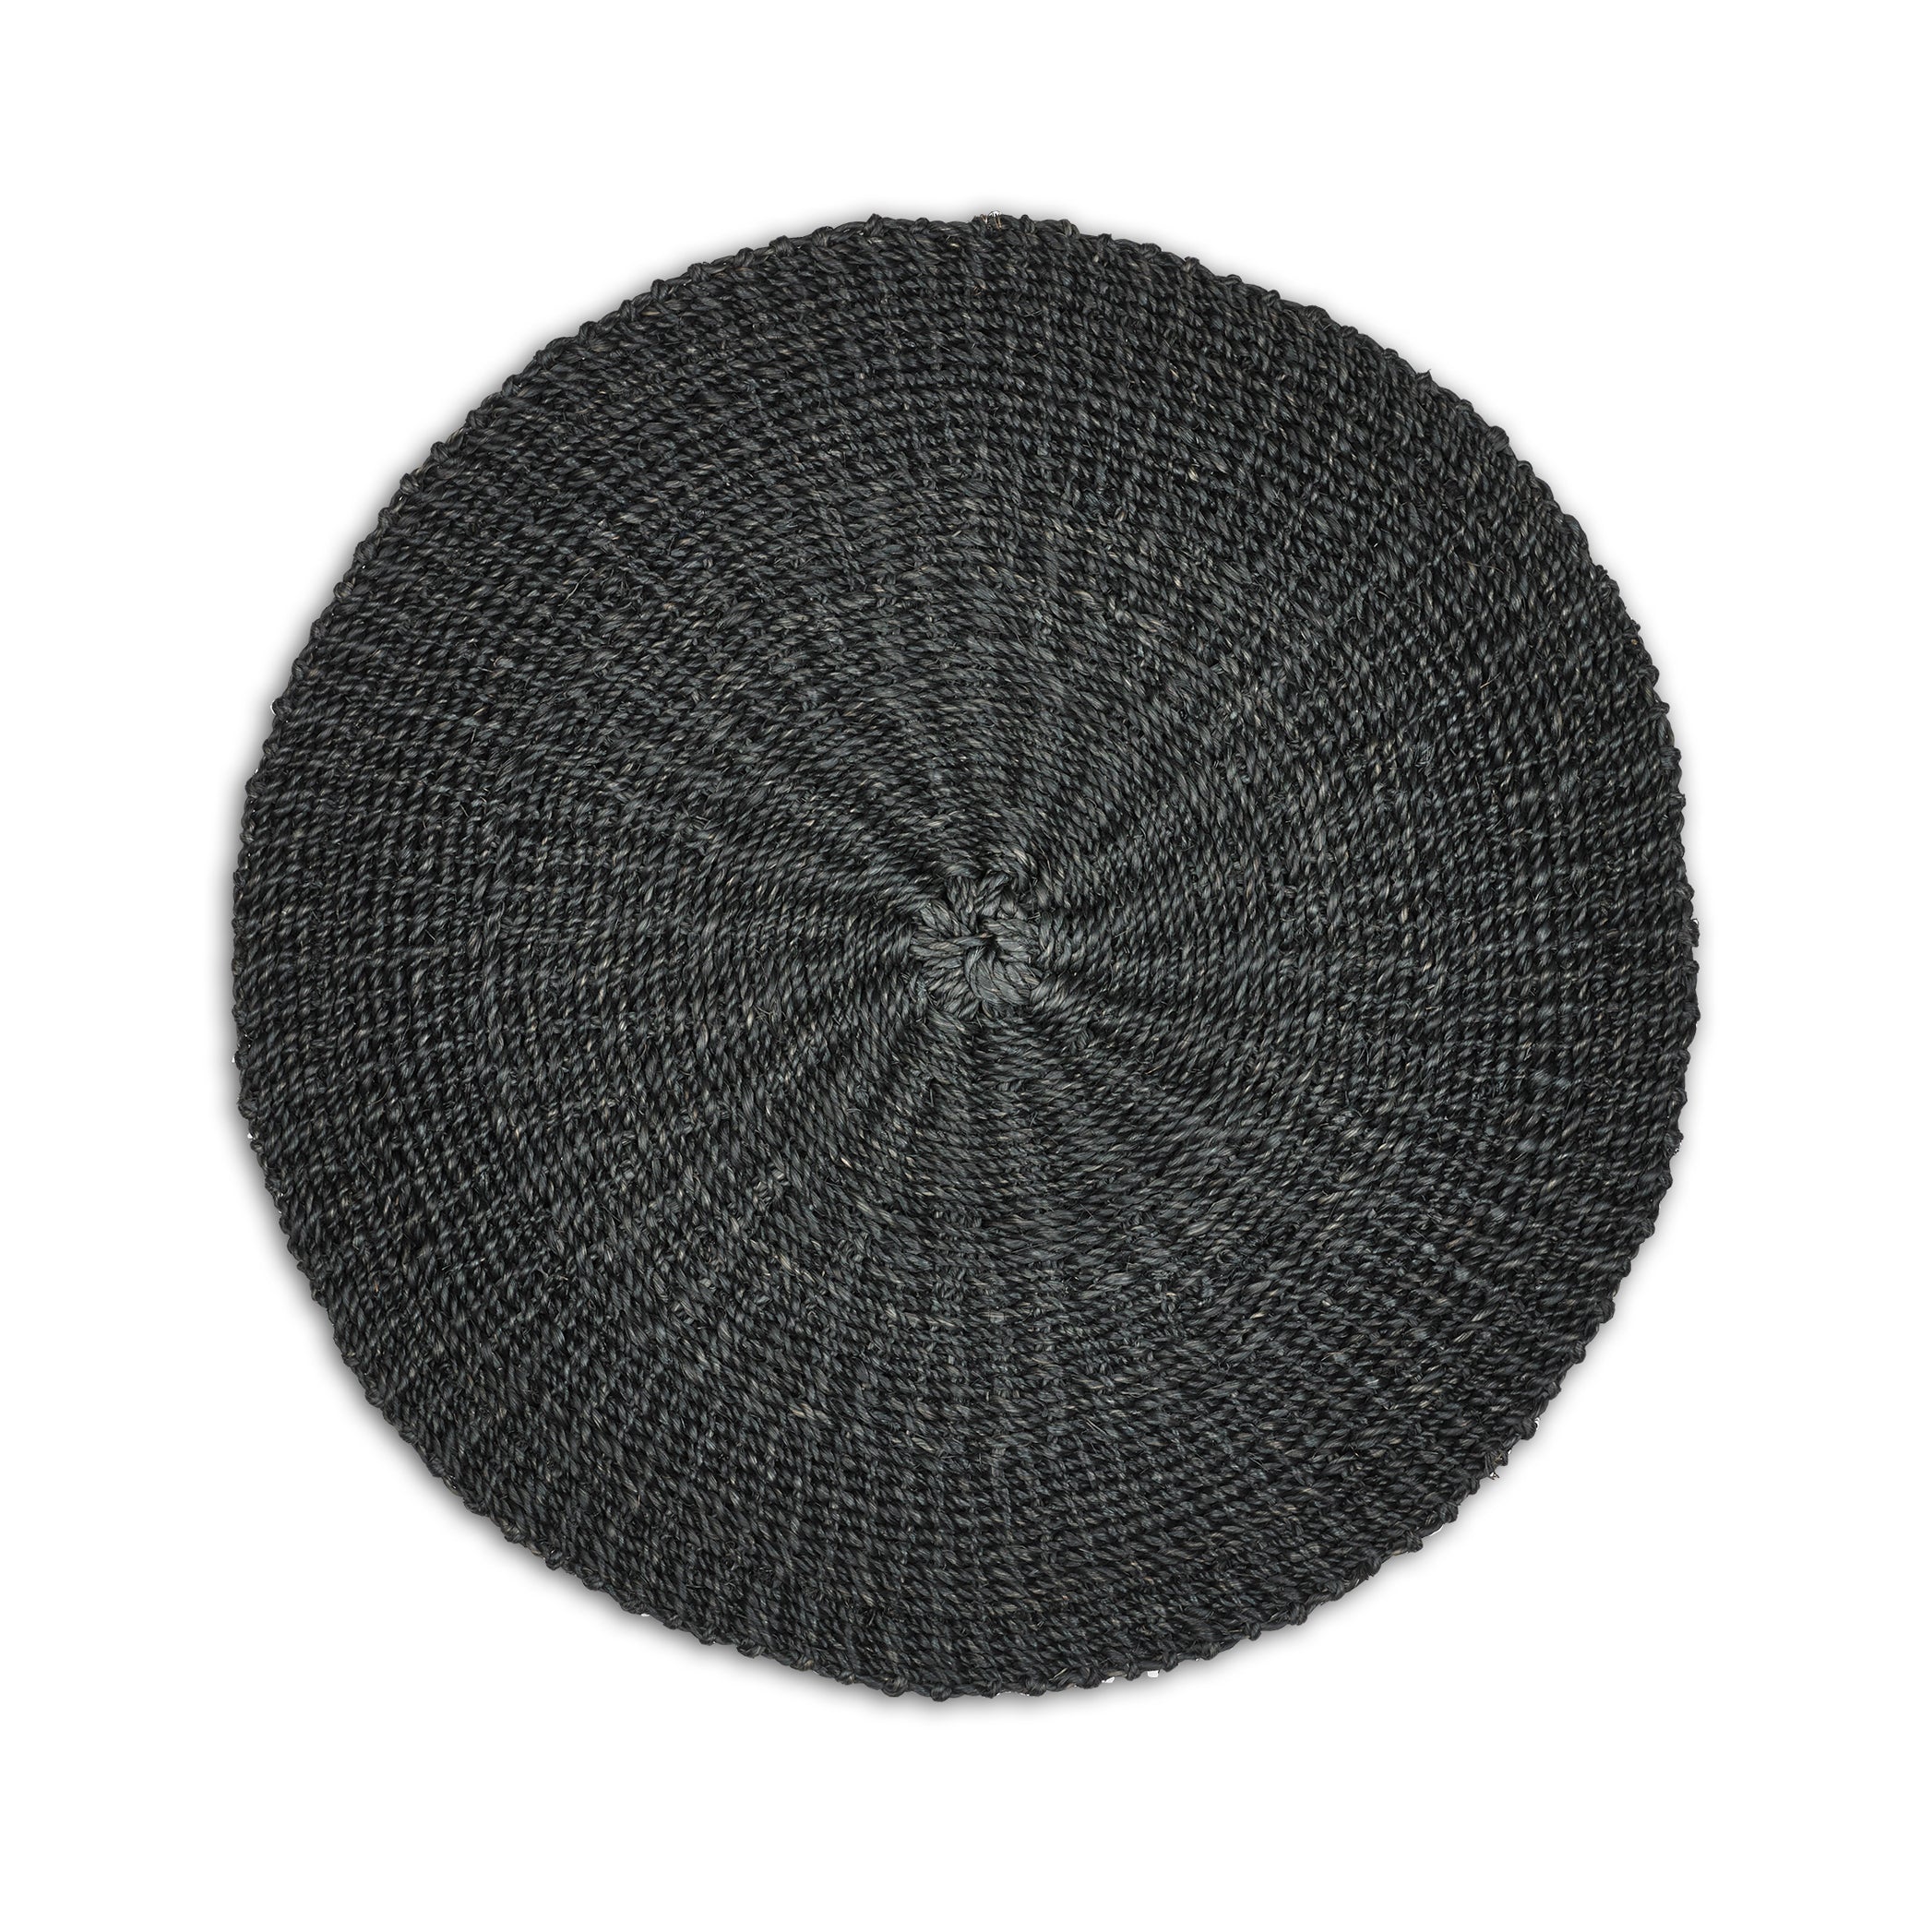 Abaca Woven Round Placemat in Black